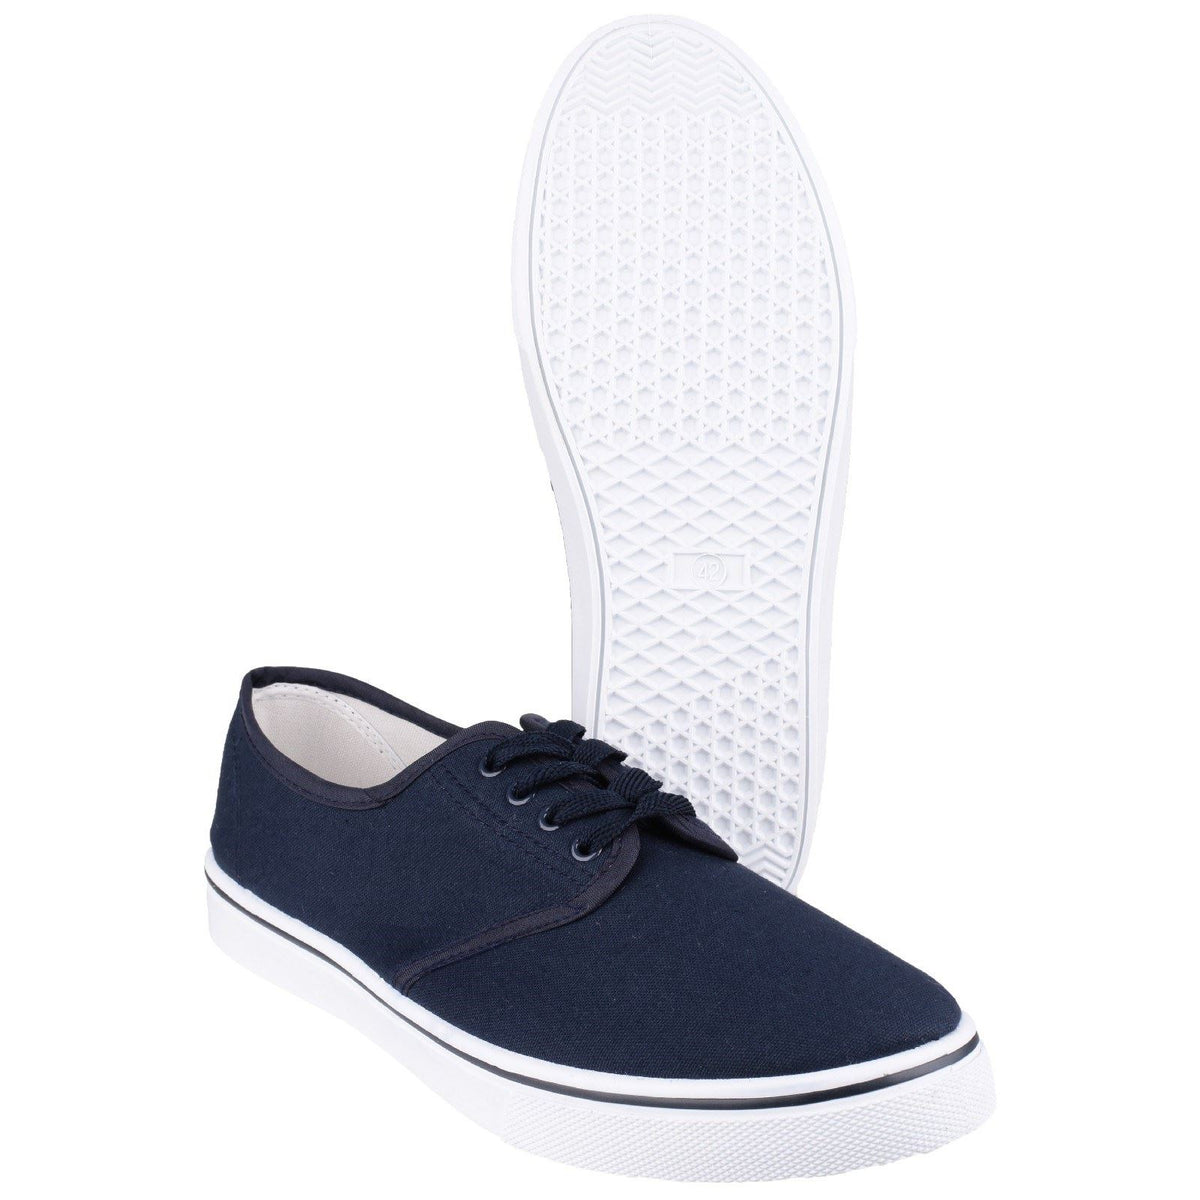 Yachtmaster Lace Up Ladies Shoes